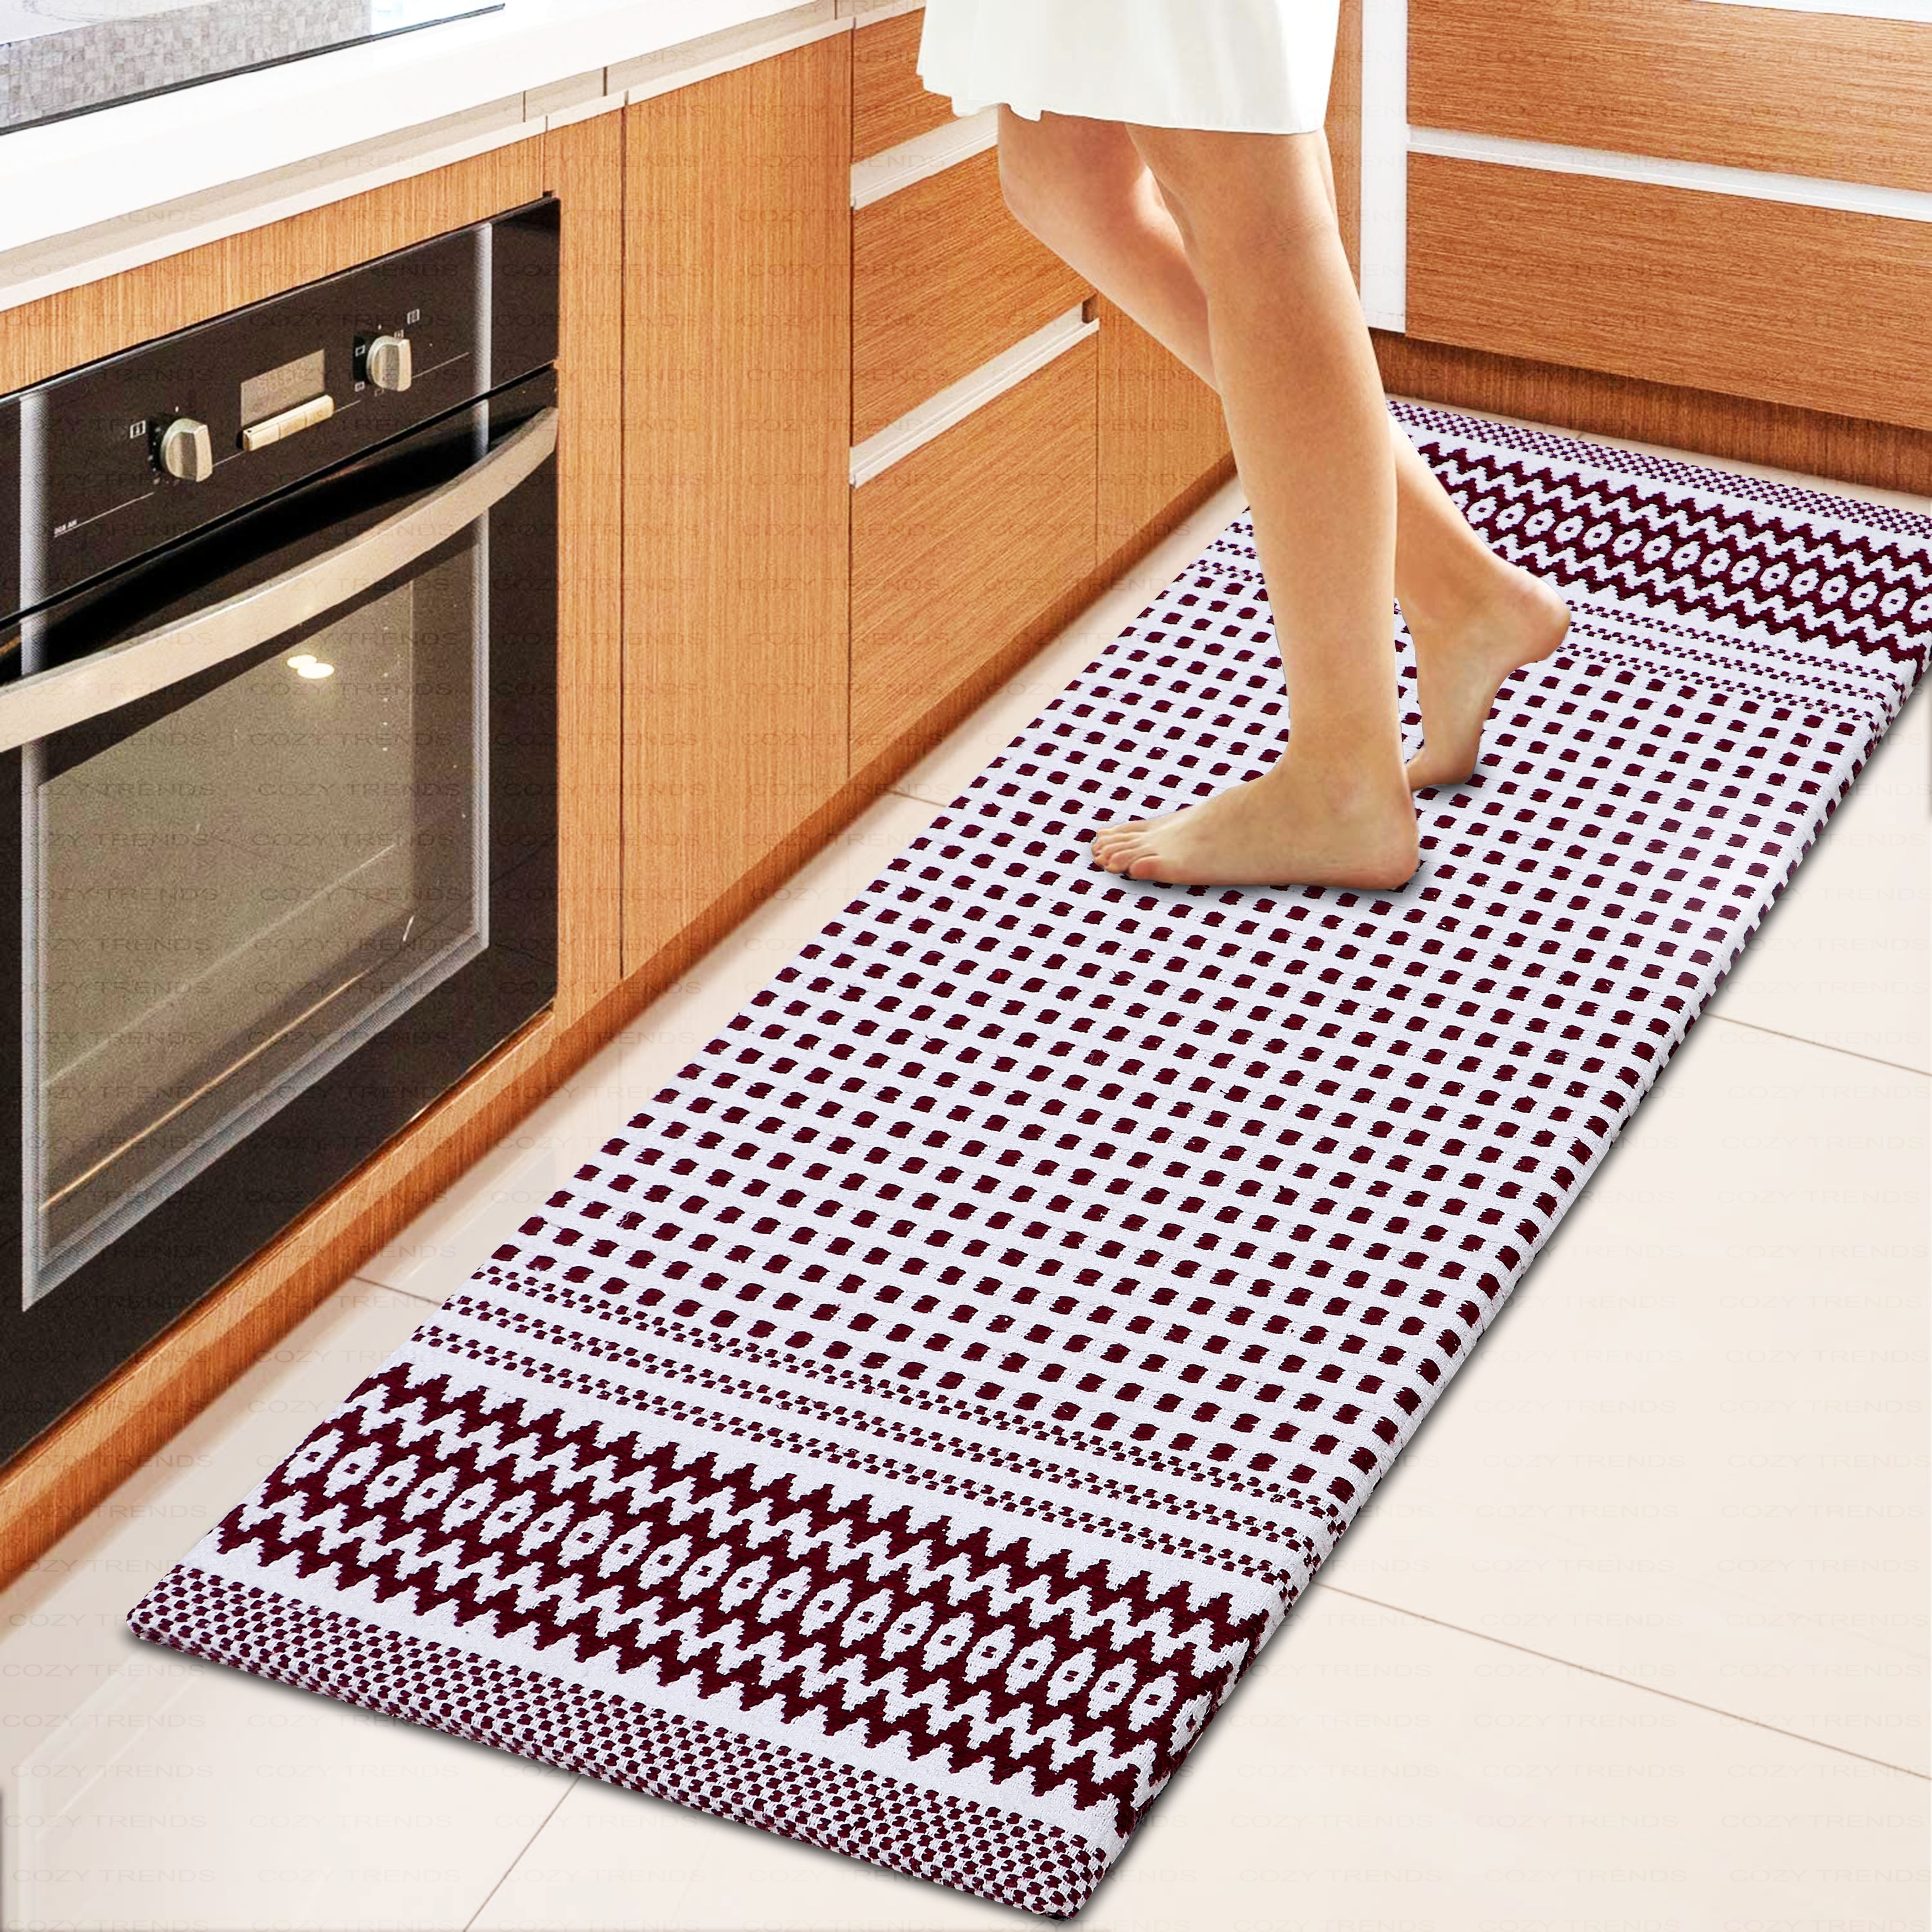 https://ak1.ostkcdn.com/images/products/is/images/direct/5020ff73d0c5add6ef68507d660318e39ca570e9/Kitchen-Runner-Rug--Mat-Cushioned-Cotton-Hand-Woven-Anti-Fatigue-Mat-Kitchen-Bathroom-Bed-side-18x48%27%27.jpg